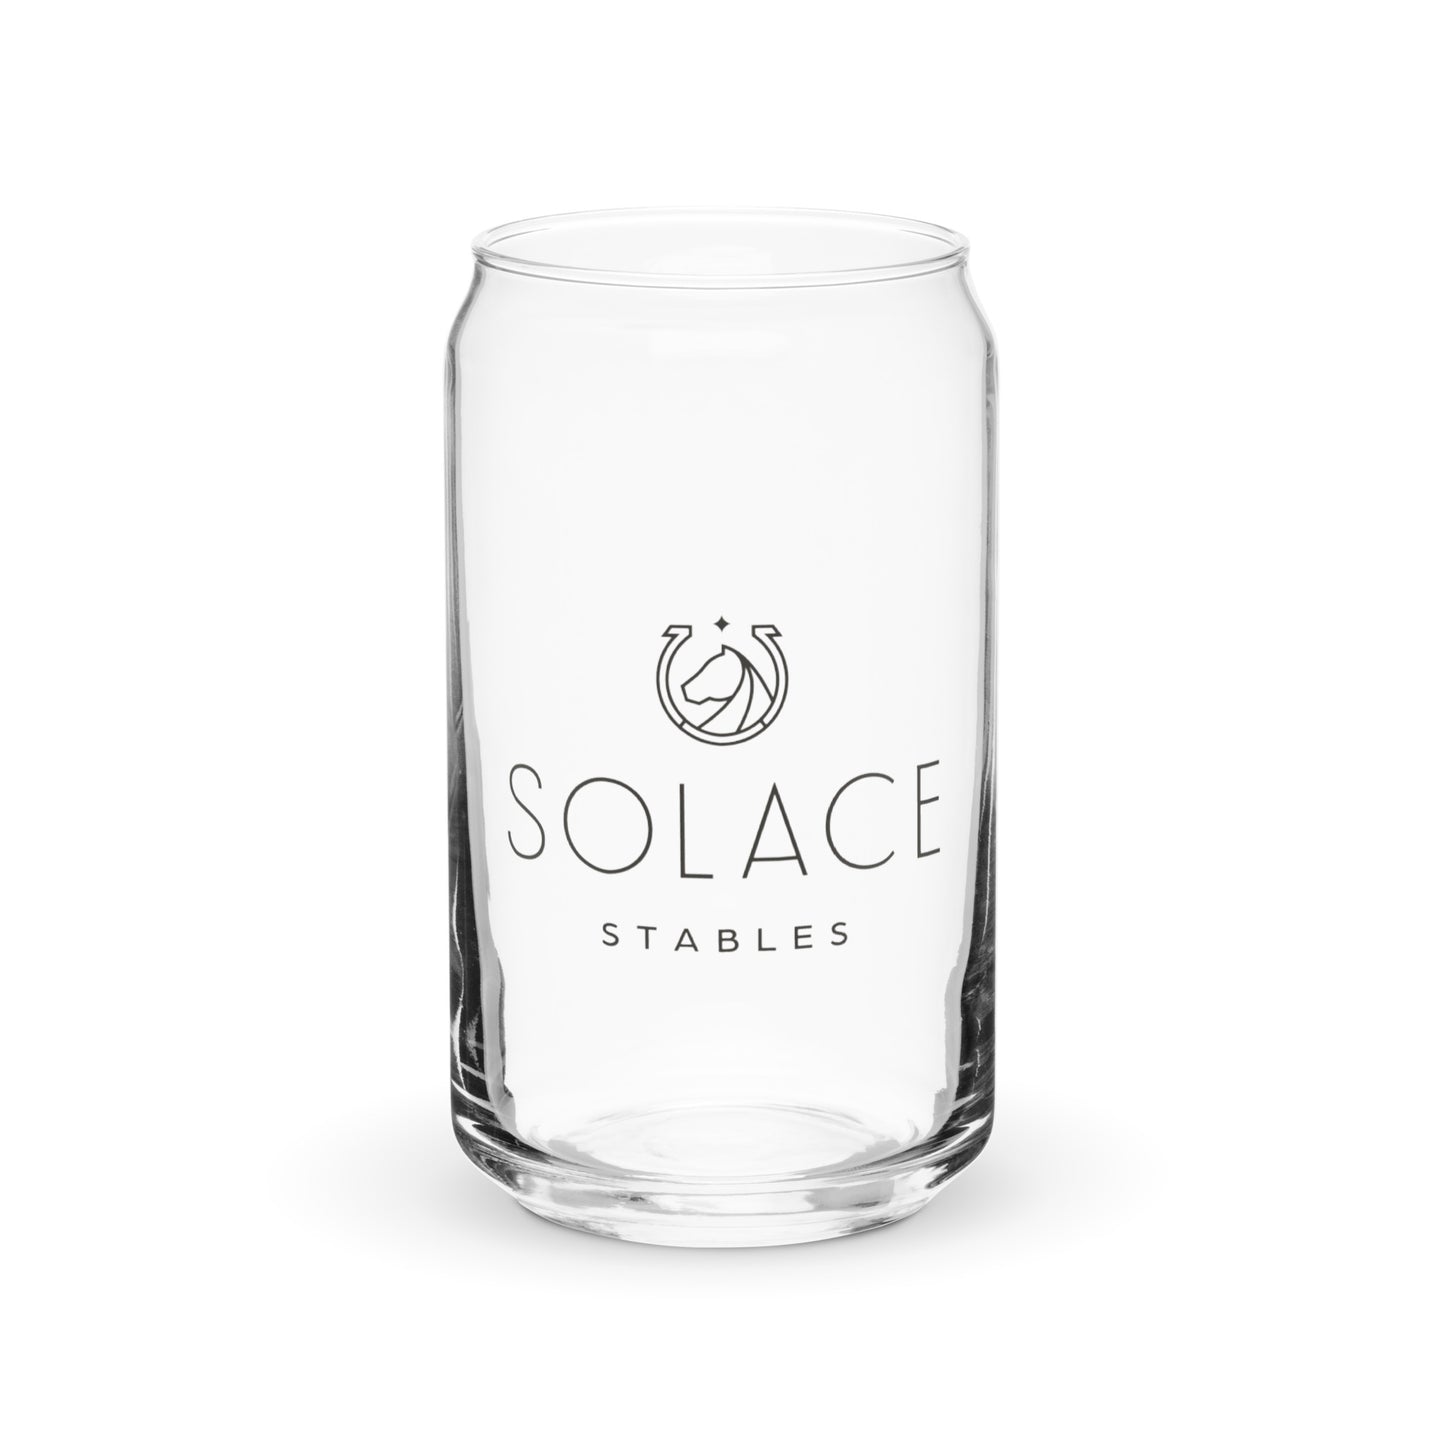 Can Glass "SOLACE STABLES"